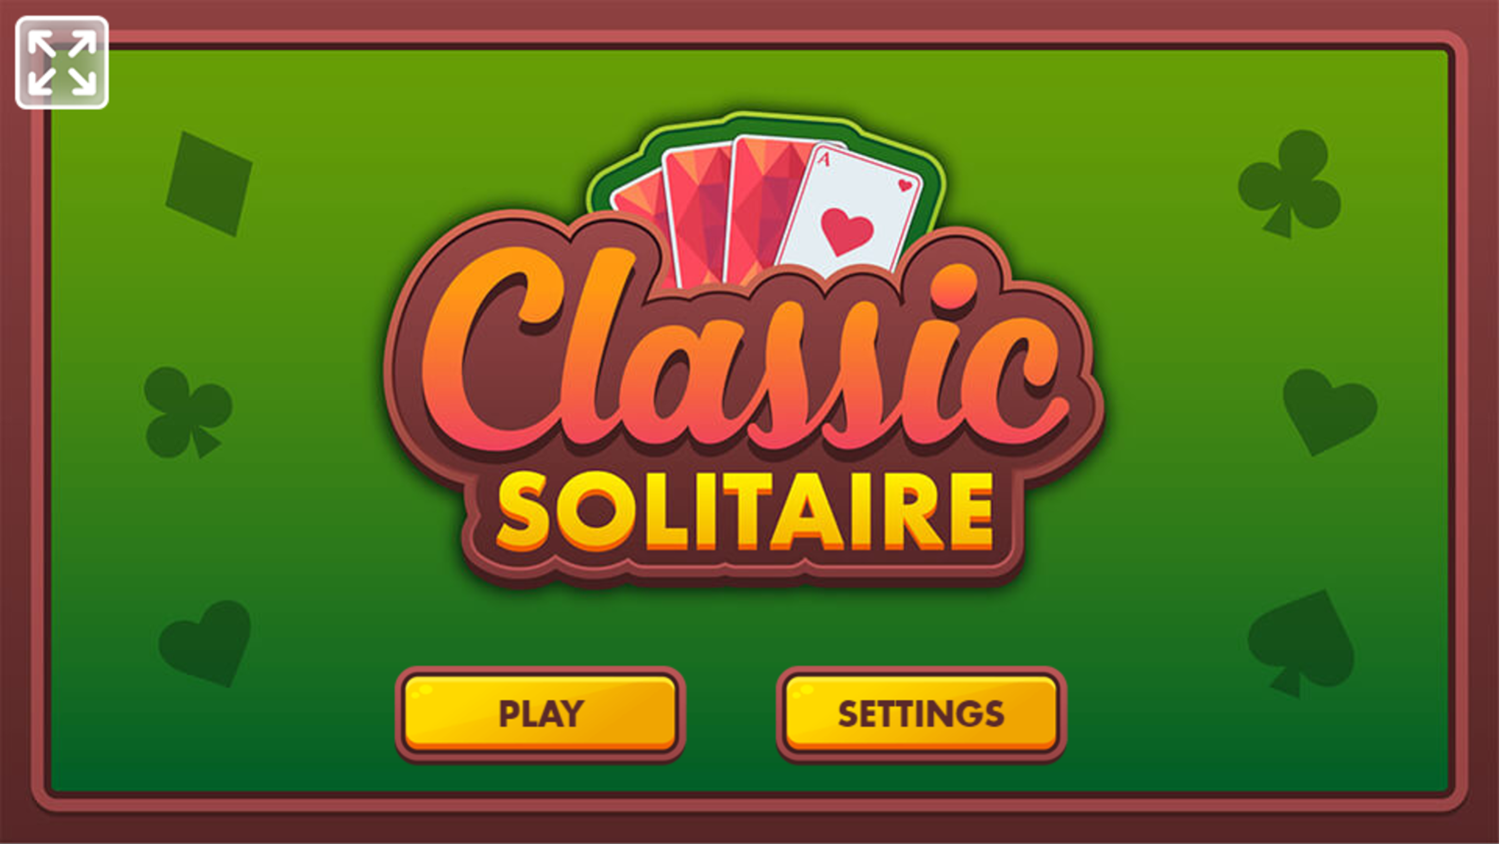 Solitaire Game Welcome Screen Screenshot.